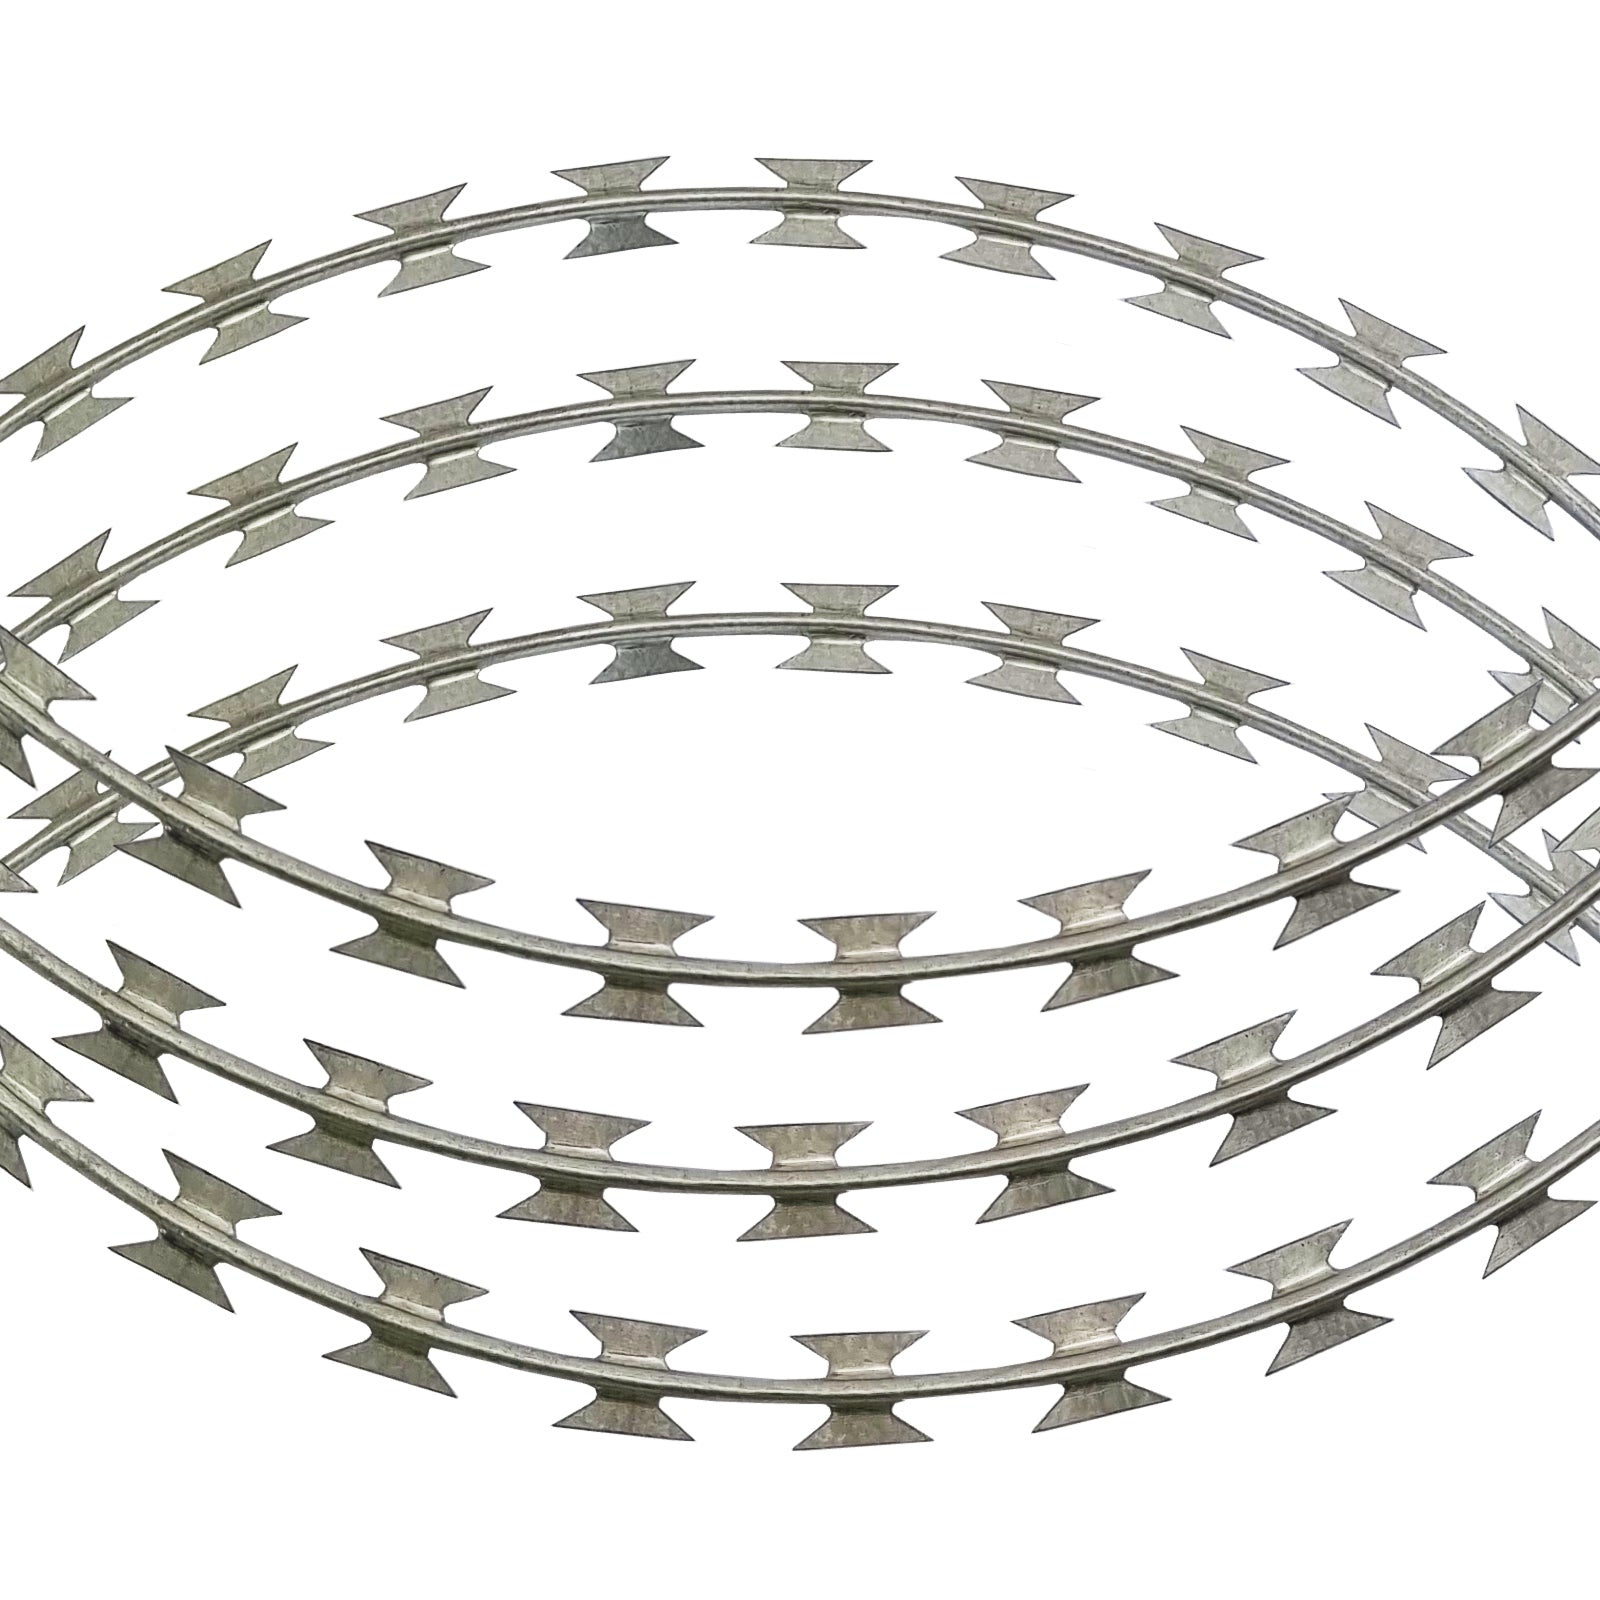 Galvanised razor wire in style BTO22. Available by the 100m coil or rings.